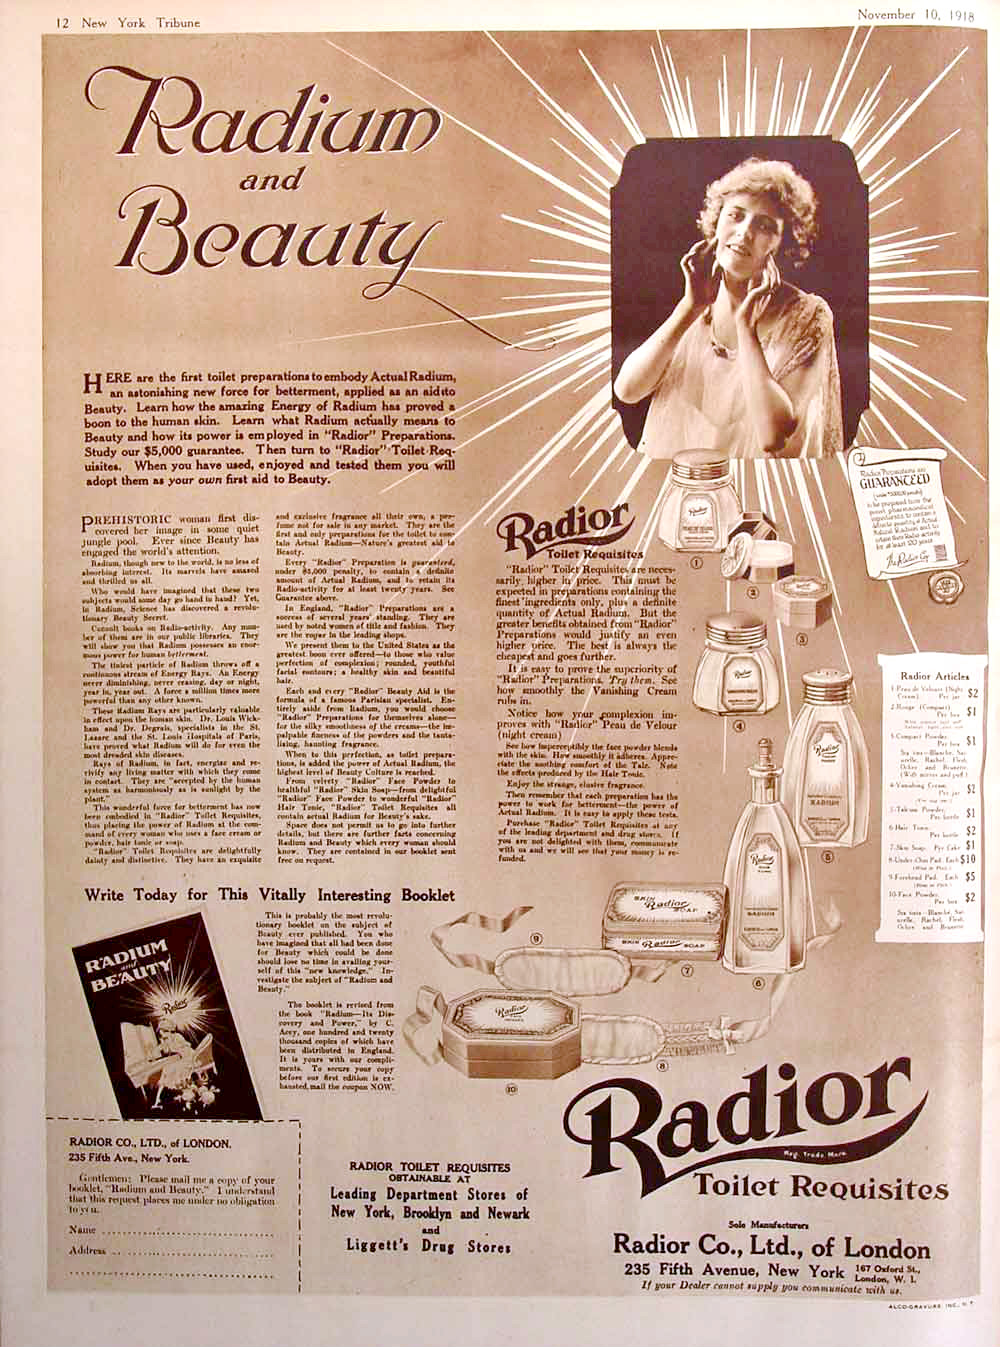 Ad for Radior cosmetics which the manufacturer claimed contained radium. The radium was supposed to have health benefits for one's skin. Powders, skin creams and soap were part of this line, which was made in London and also sold in the US.